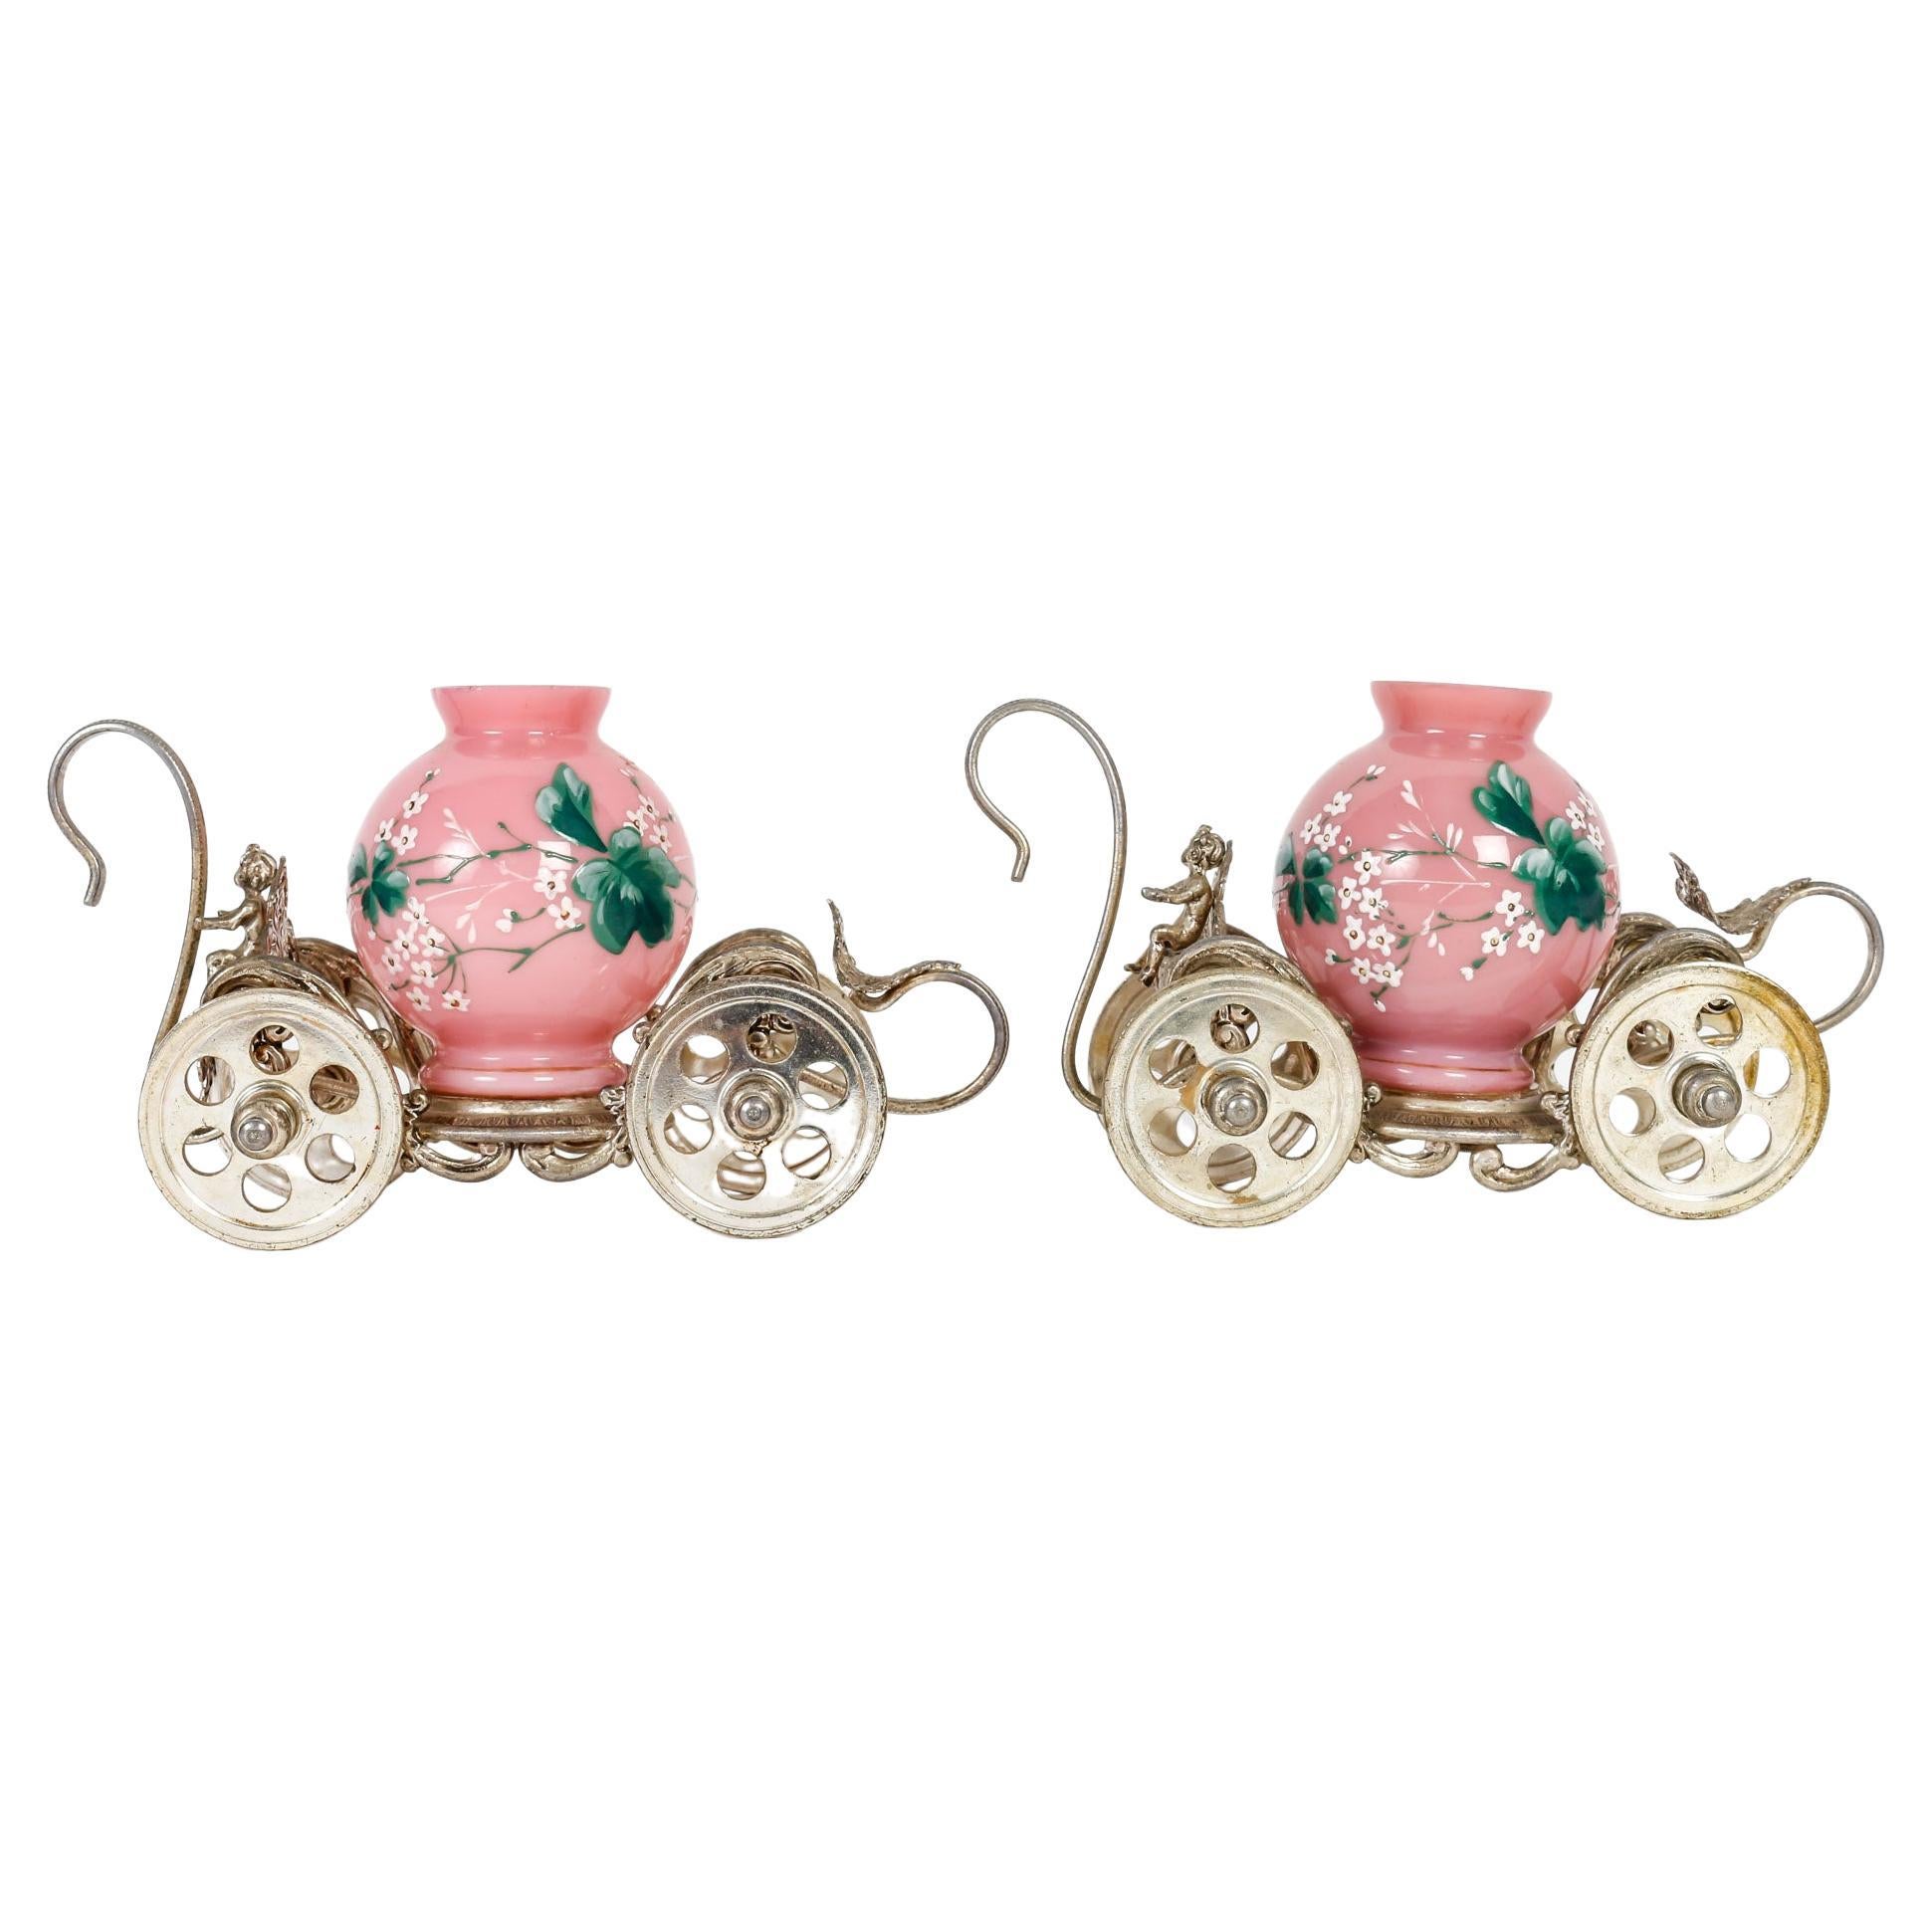 Two Carriages for Bouquets of Flowers for Table Decoration, 19th Century. For Sale